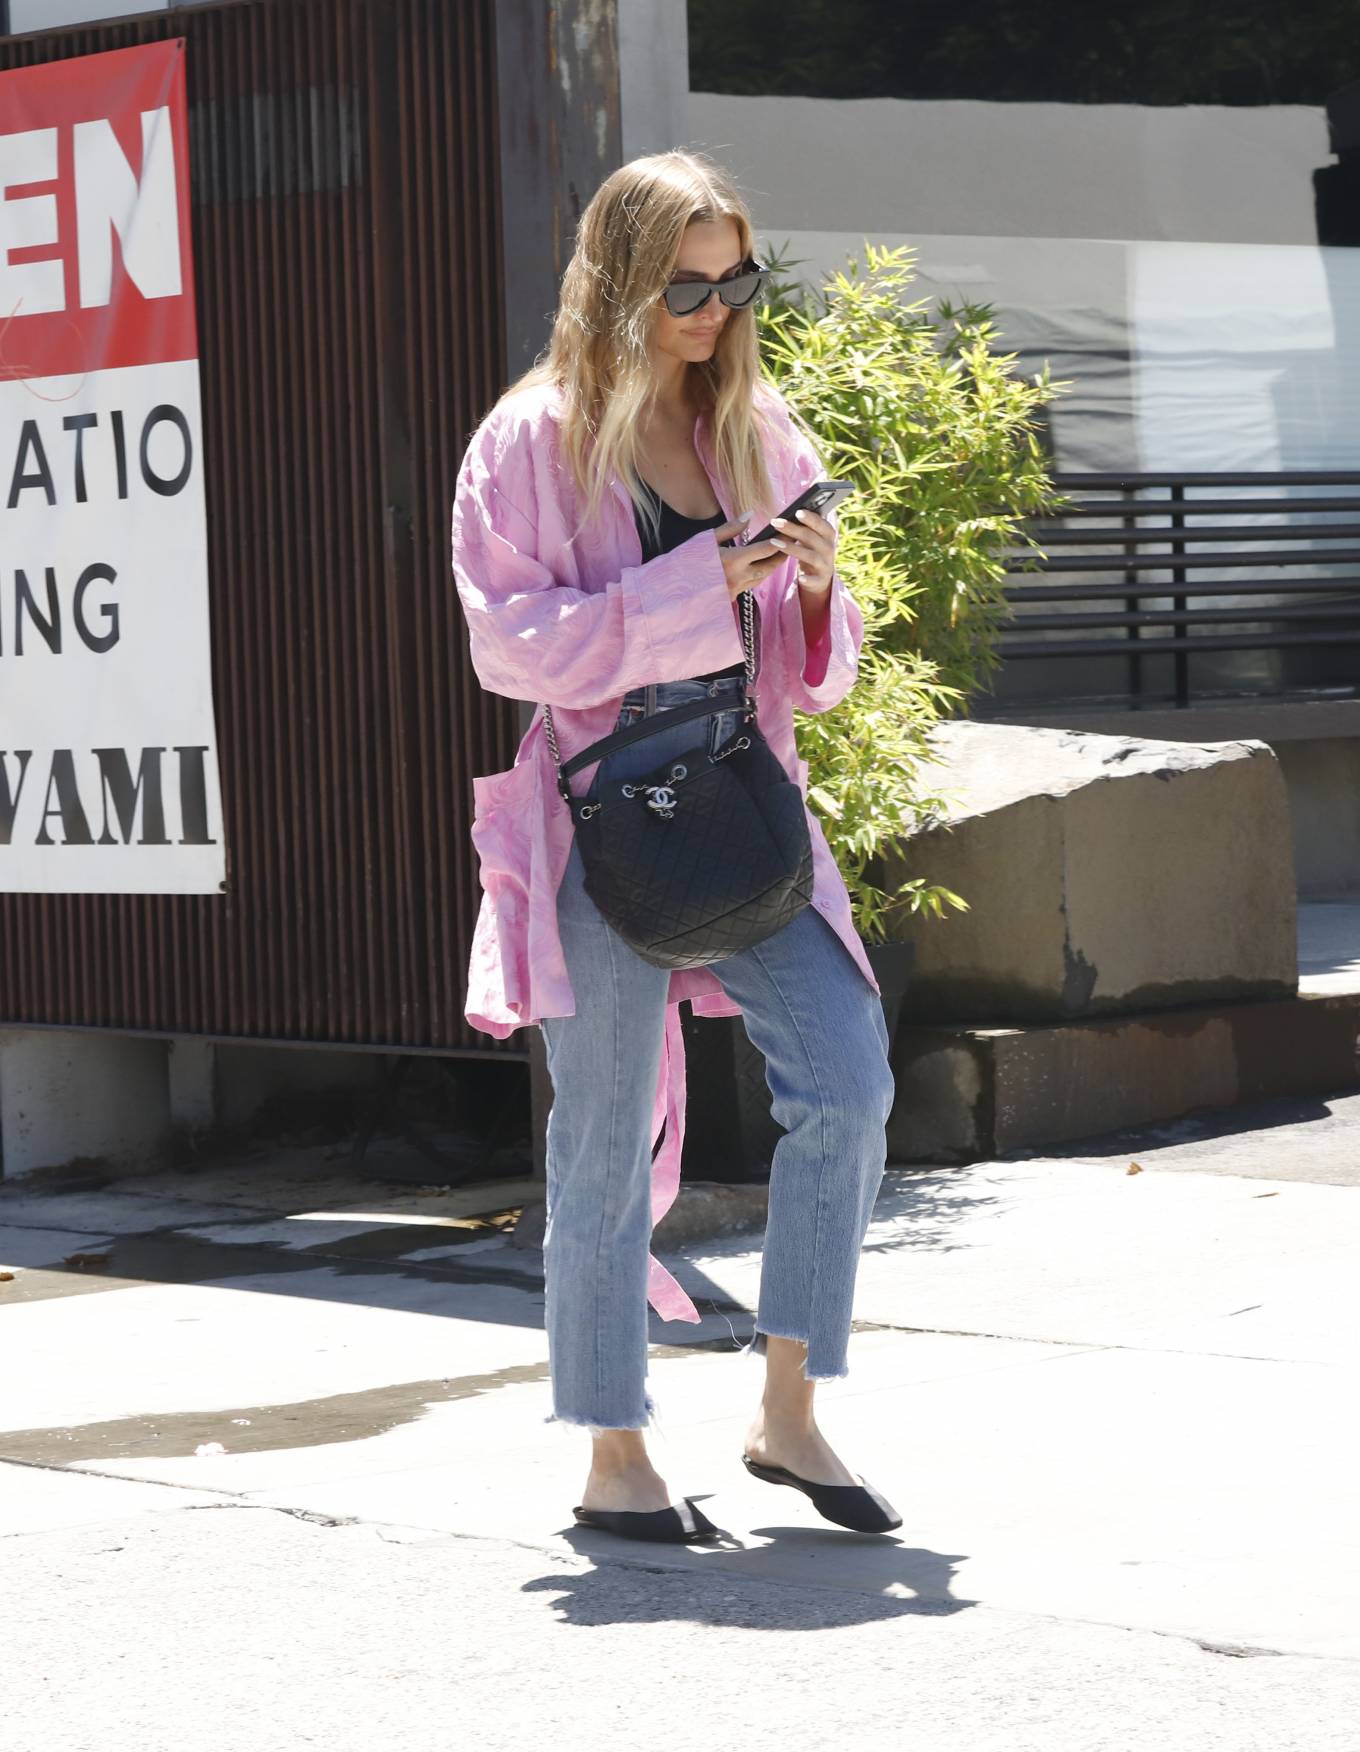 Ashlee Simpson - Stepping out in Los Angeles